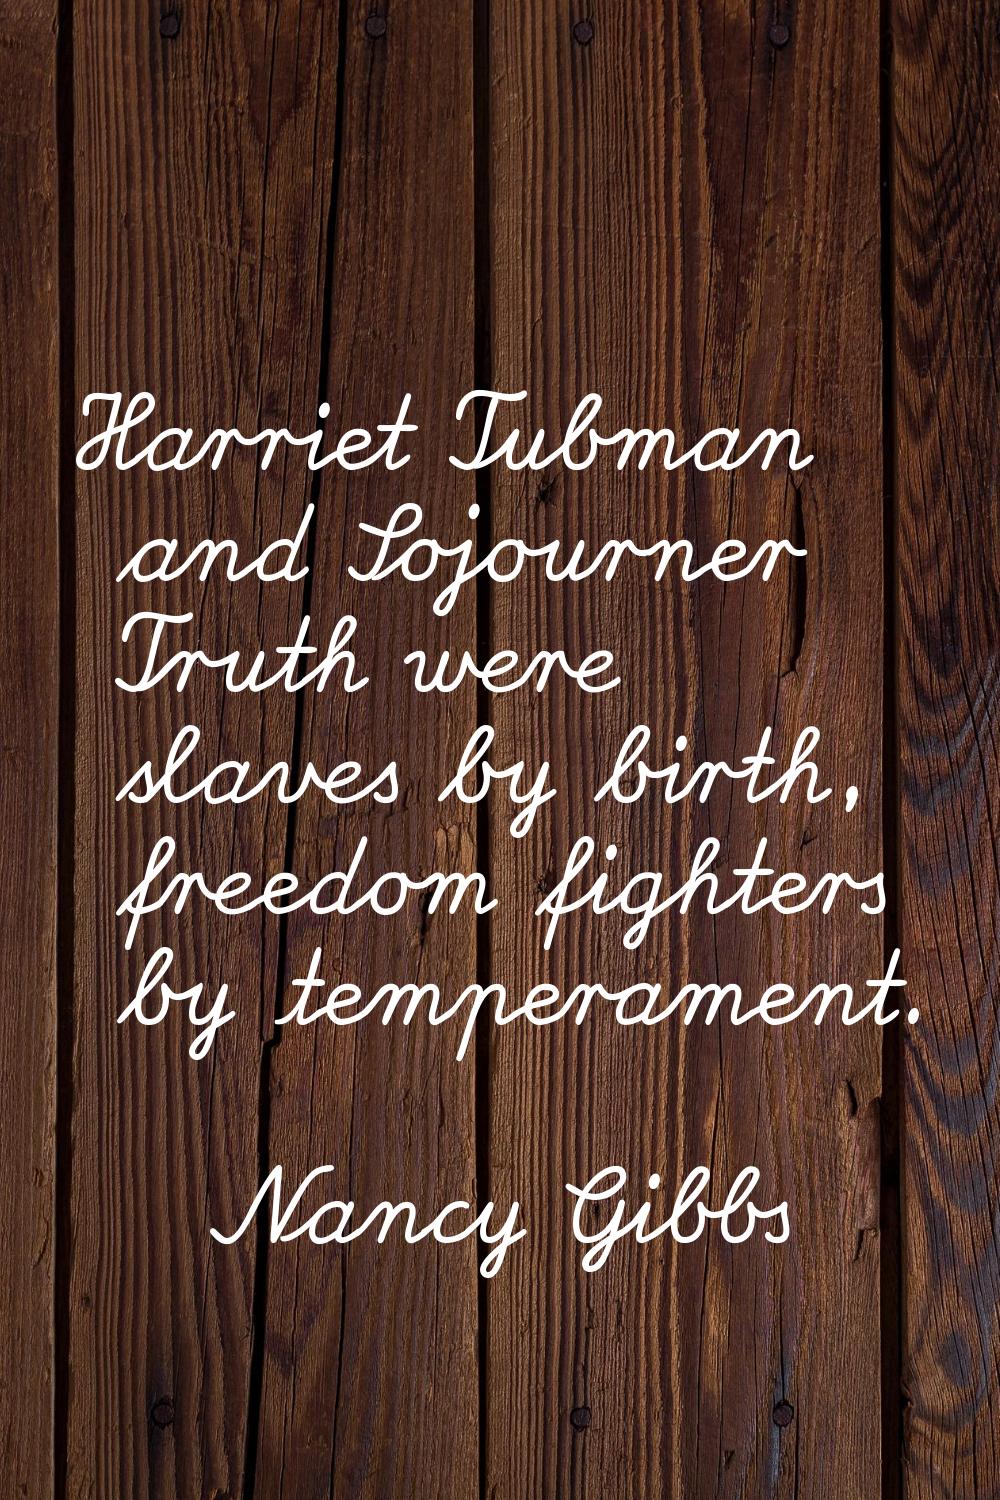 Harriet Tubman and Sojourner Truth were slaves by birth, freedom fighters by temperament.